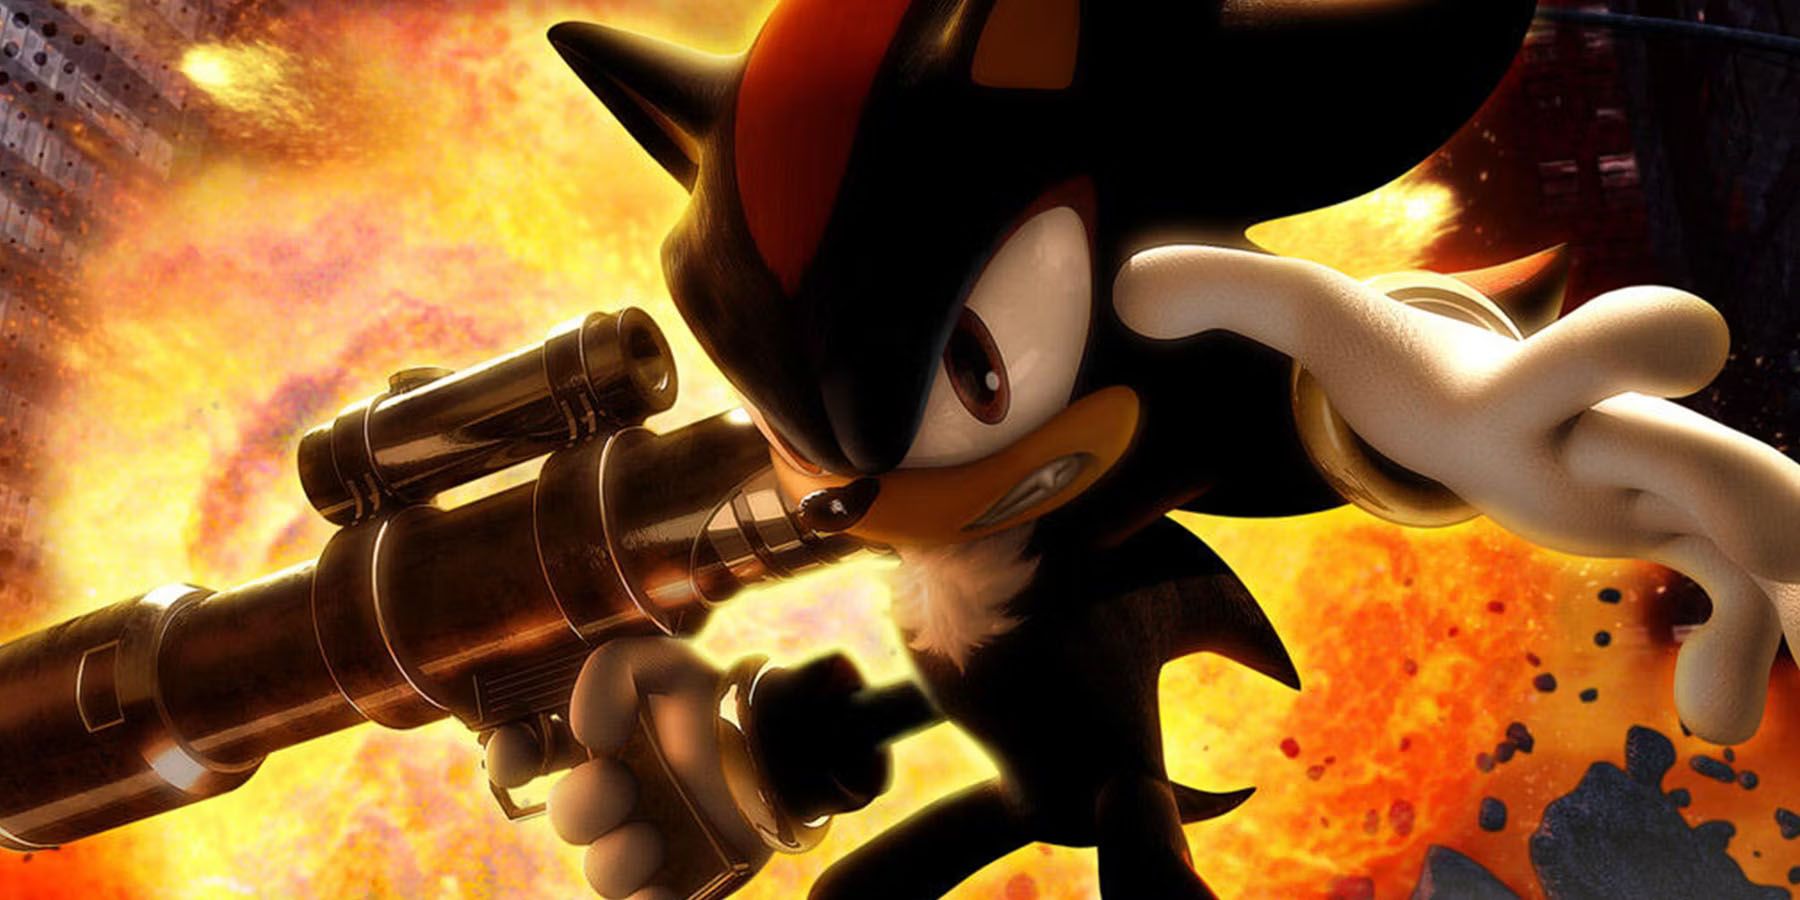 A promotial image of Shadow standing in front of an explosion while holding a gun in the Shadow the Hedgehog game.